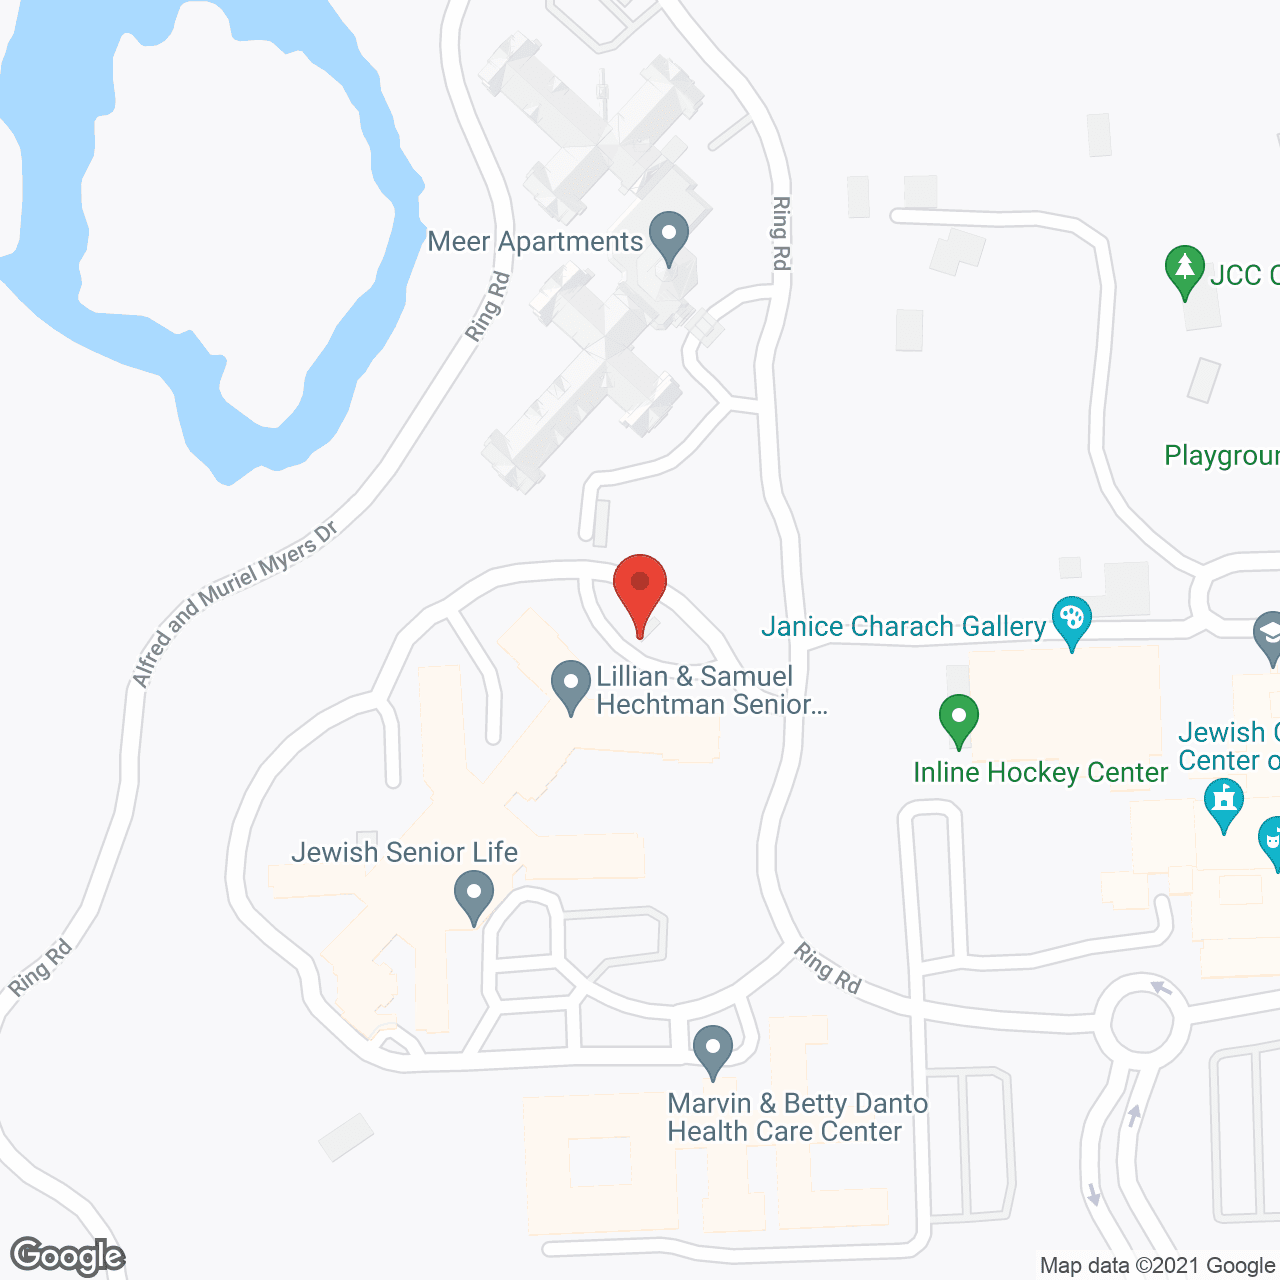 Jewish Federation Apartments in google map